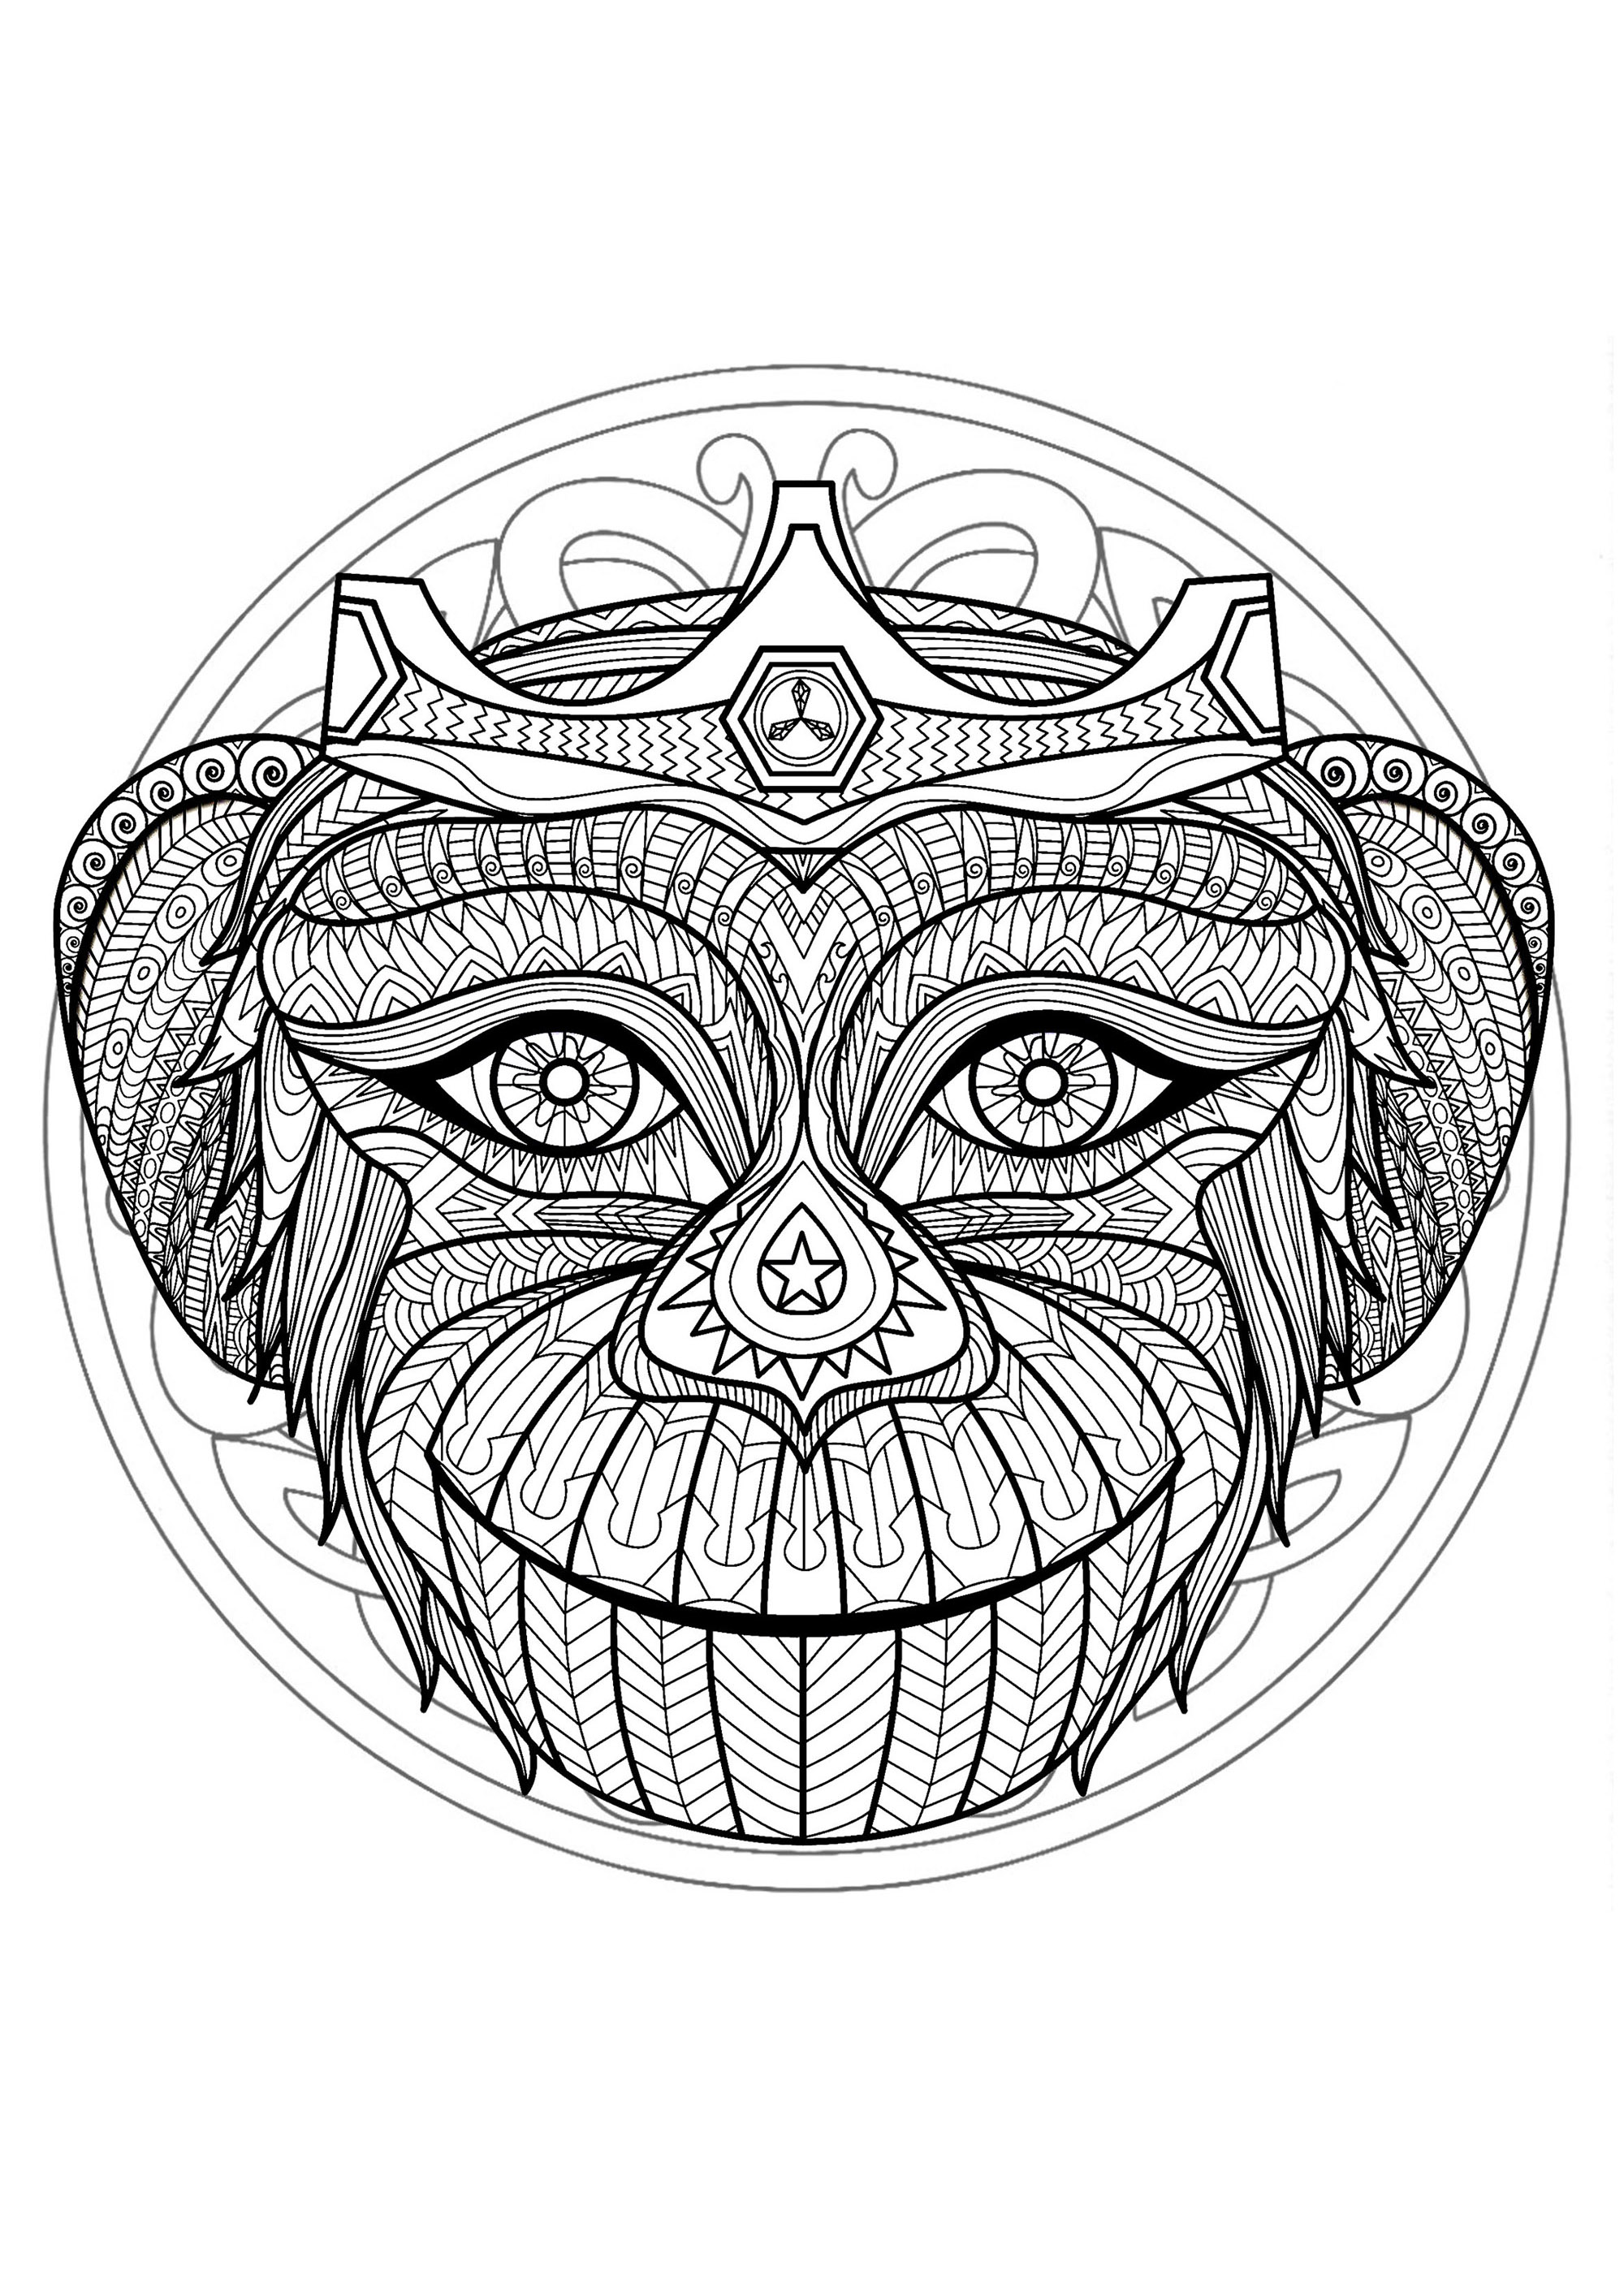 Prepare your prettiest colors to give life to this beautiful monkey. We would like to see the result ! Do whatever it takes to get rid of any distractions that may interfere with your coloring.